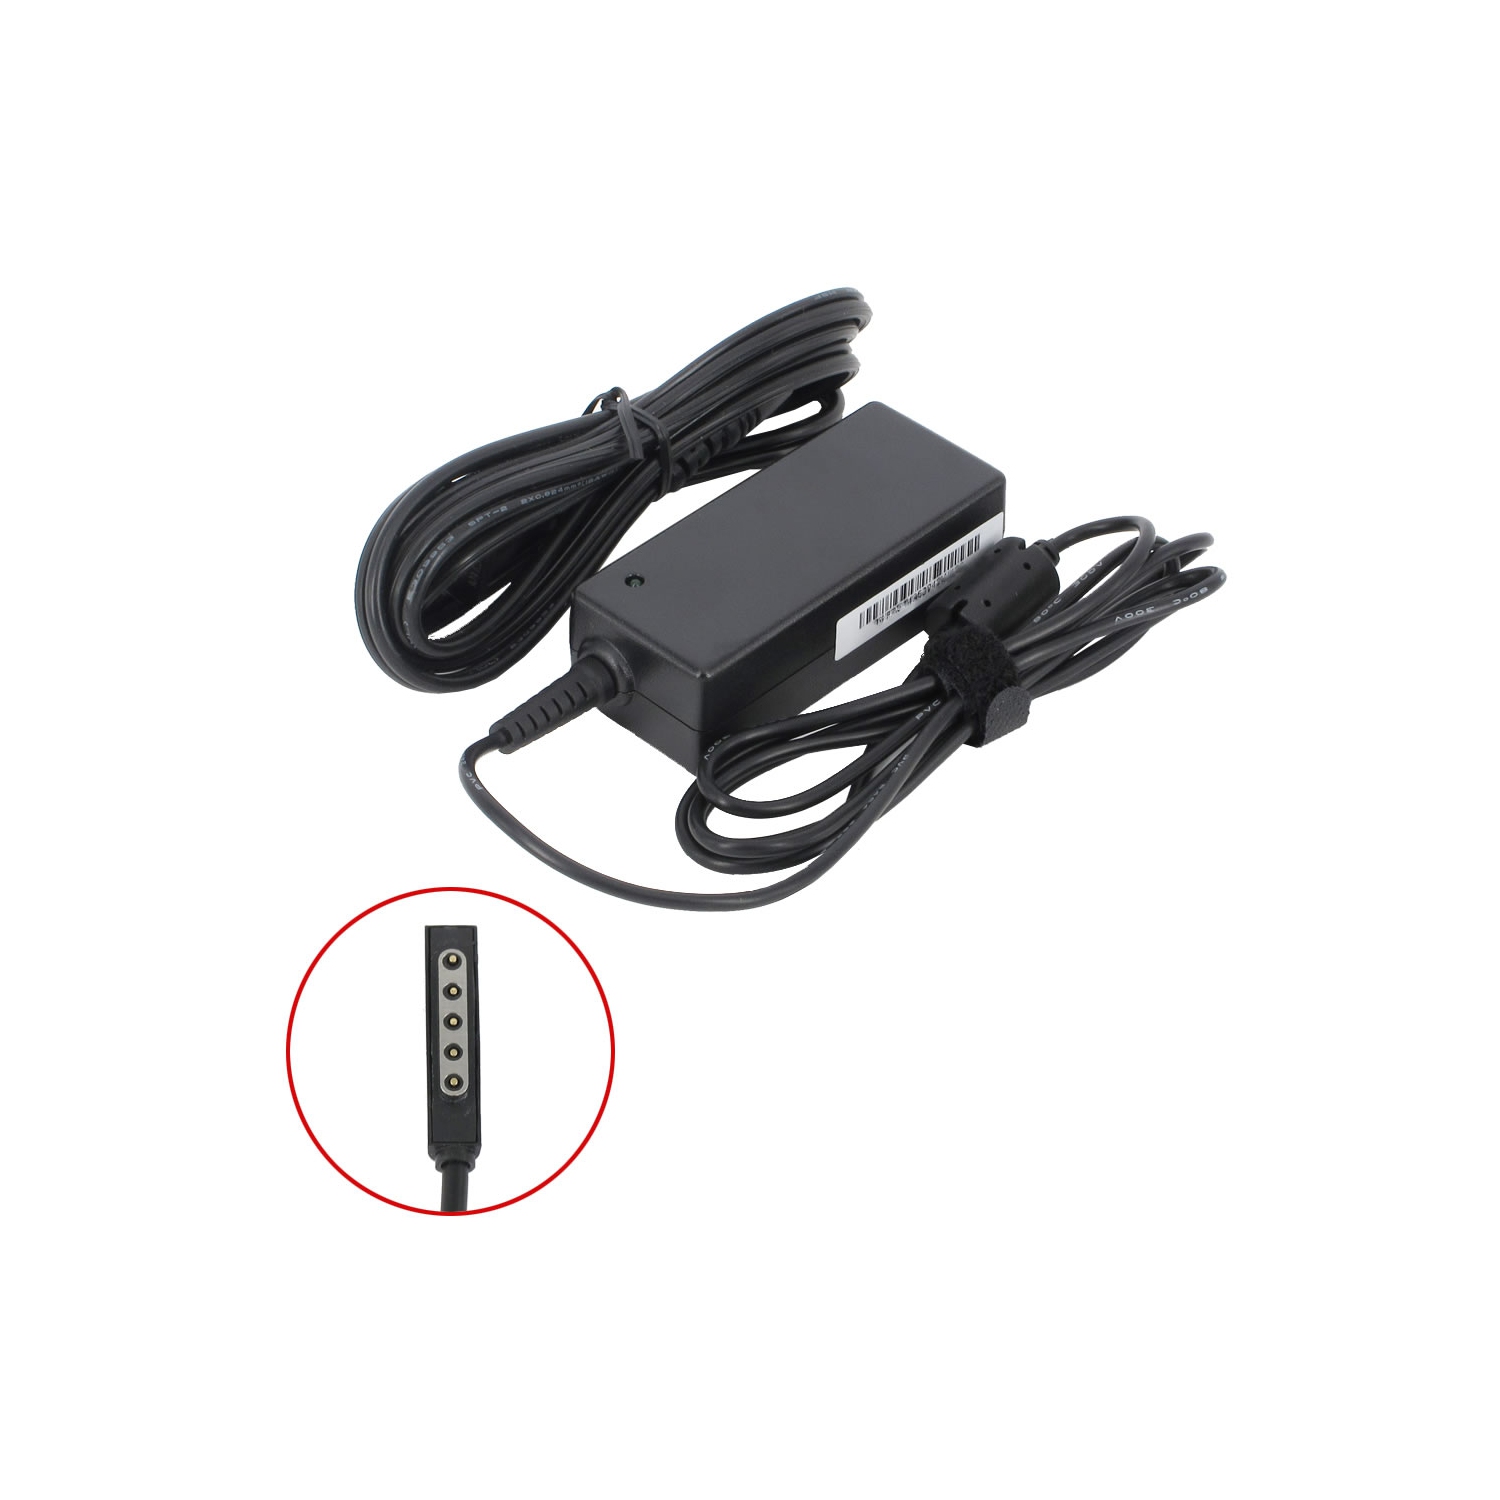 BattDepot: New Replacement Tablet AC Adapter for Microsoft Surface Pro 2, Q6T-00001 (12V 3.6A 45W)